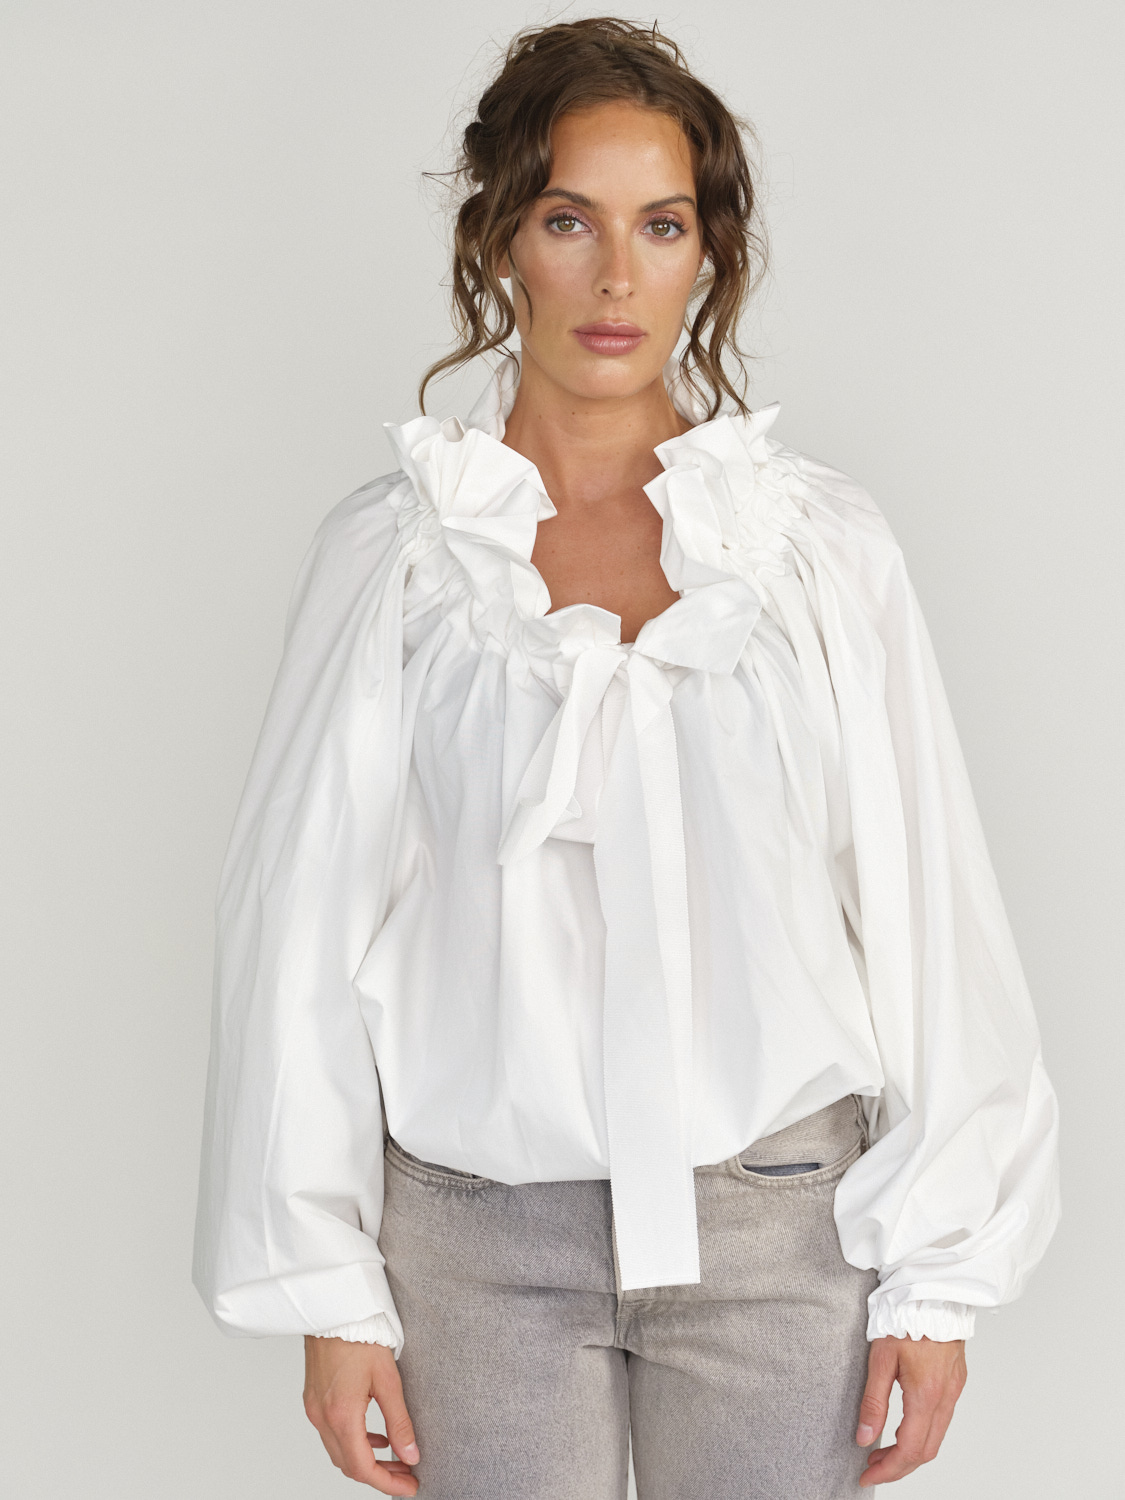 Patou Gros Grain - Oversized blouse with ruffle collar white S/M